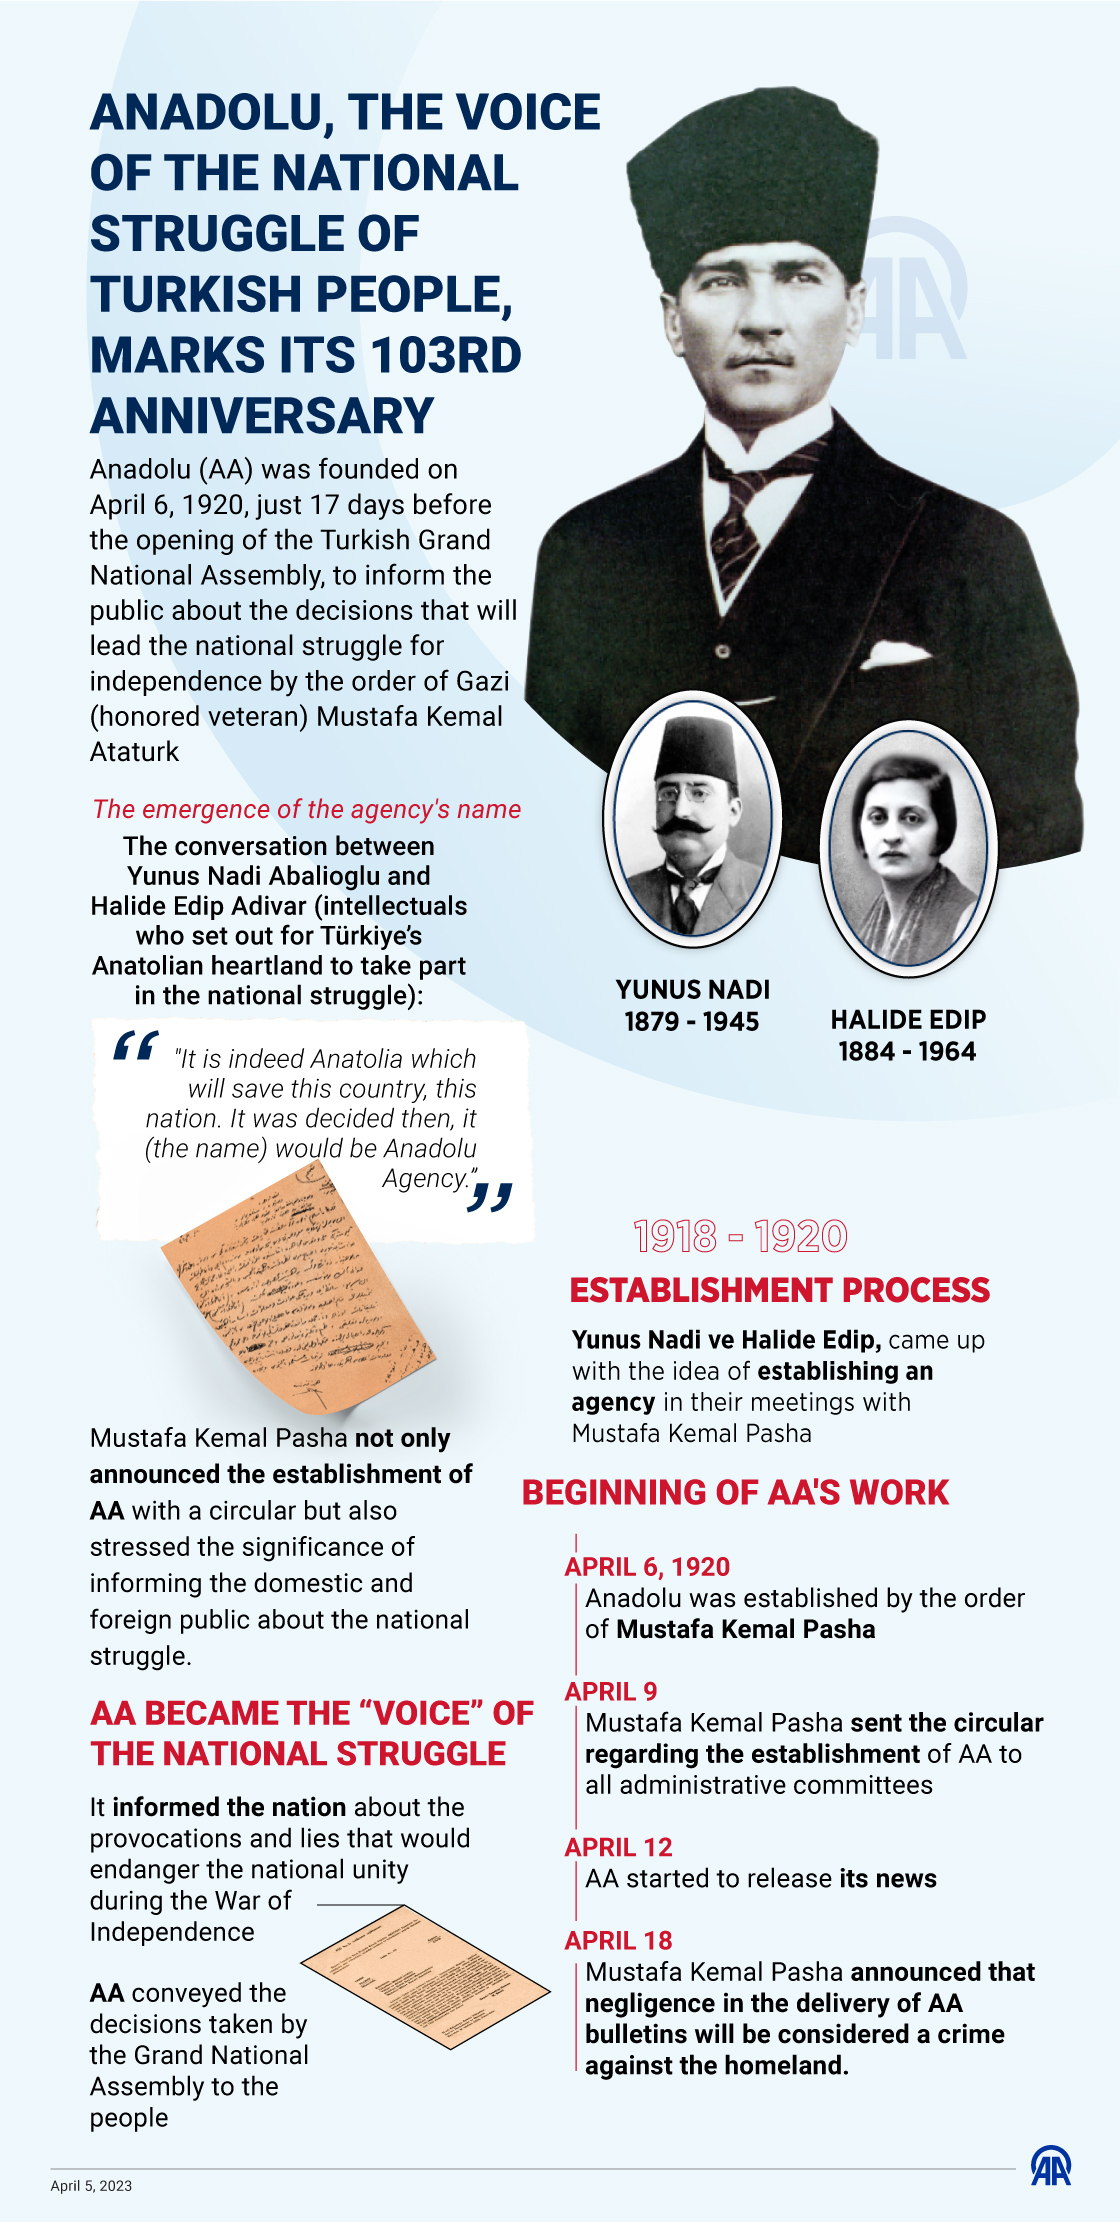 Anadolu, the voice of the national struggle of Turkish people, marks its 103rd anniversary